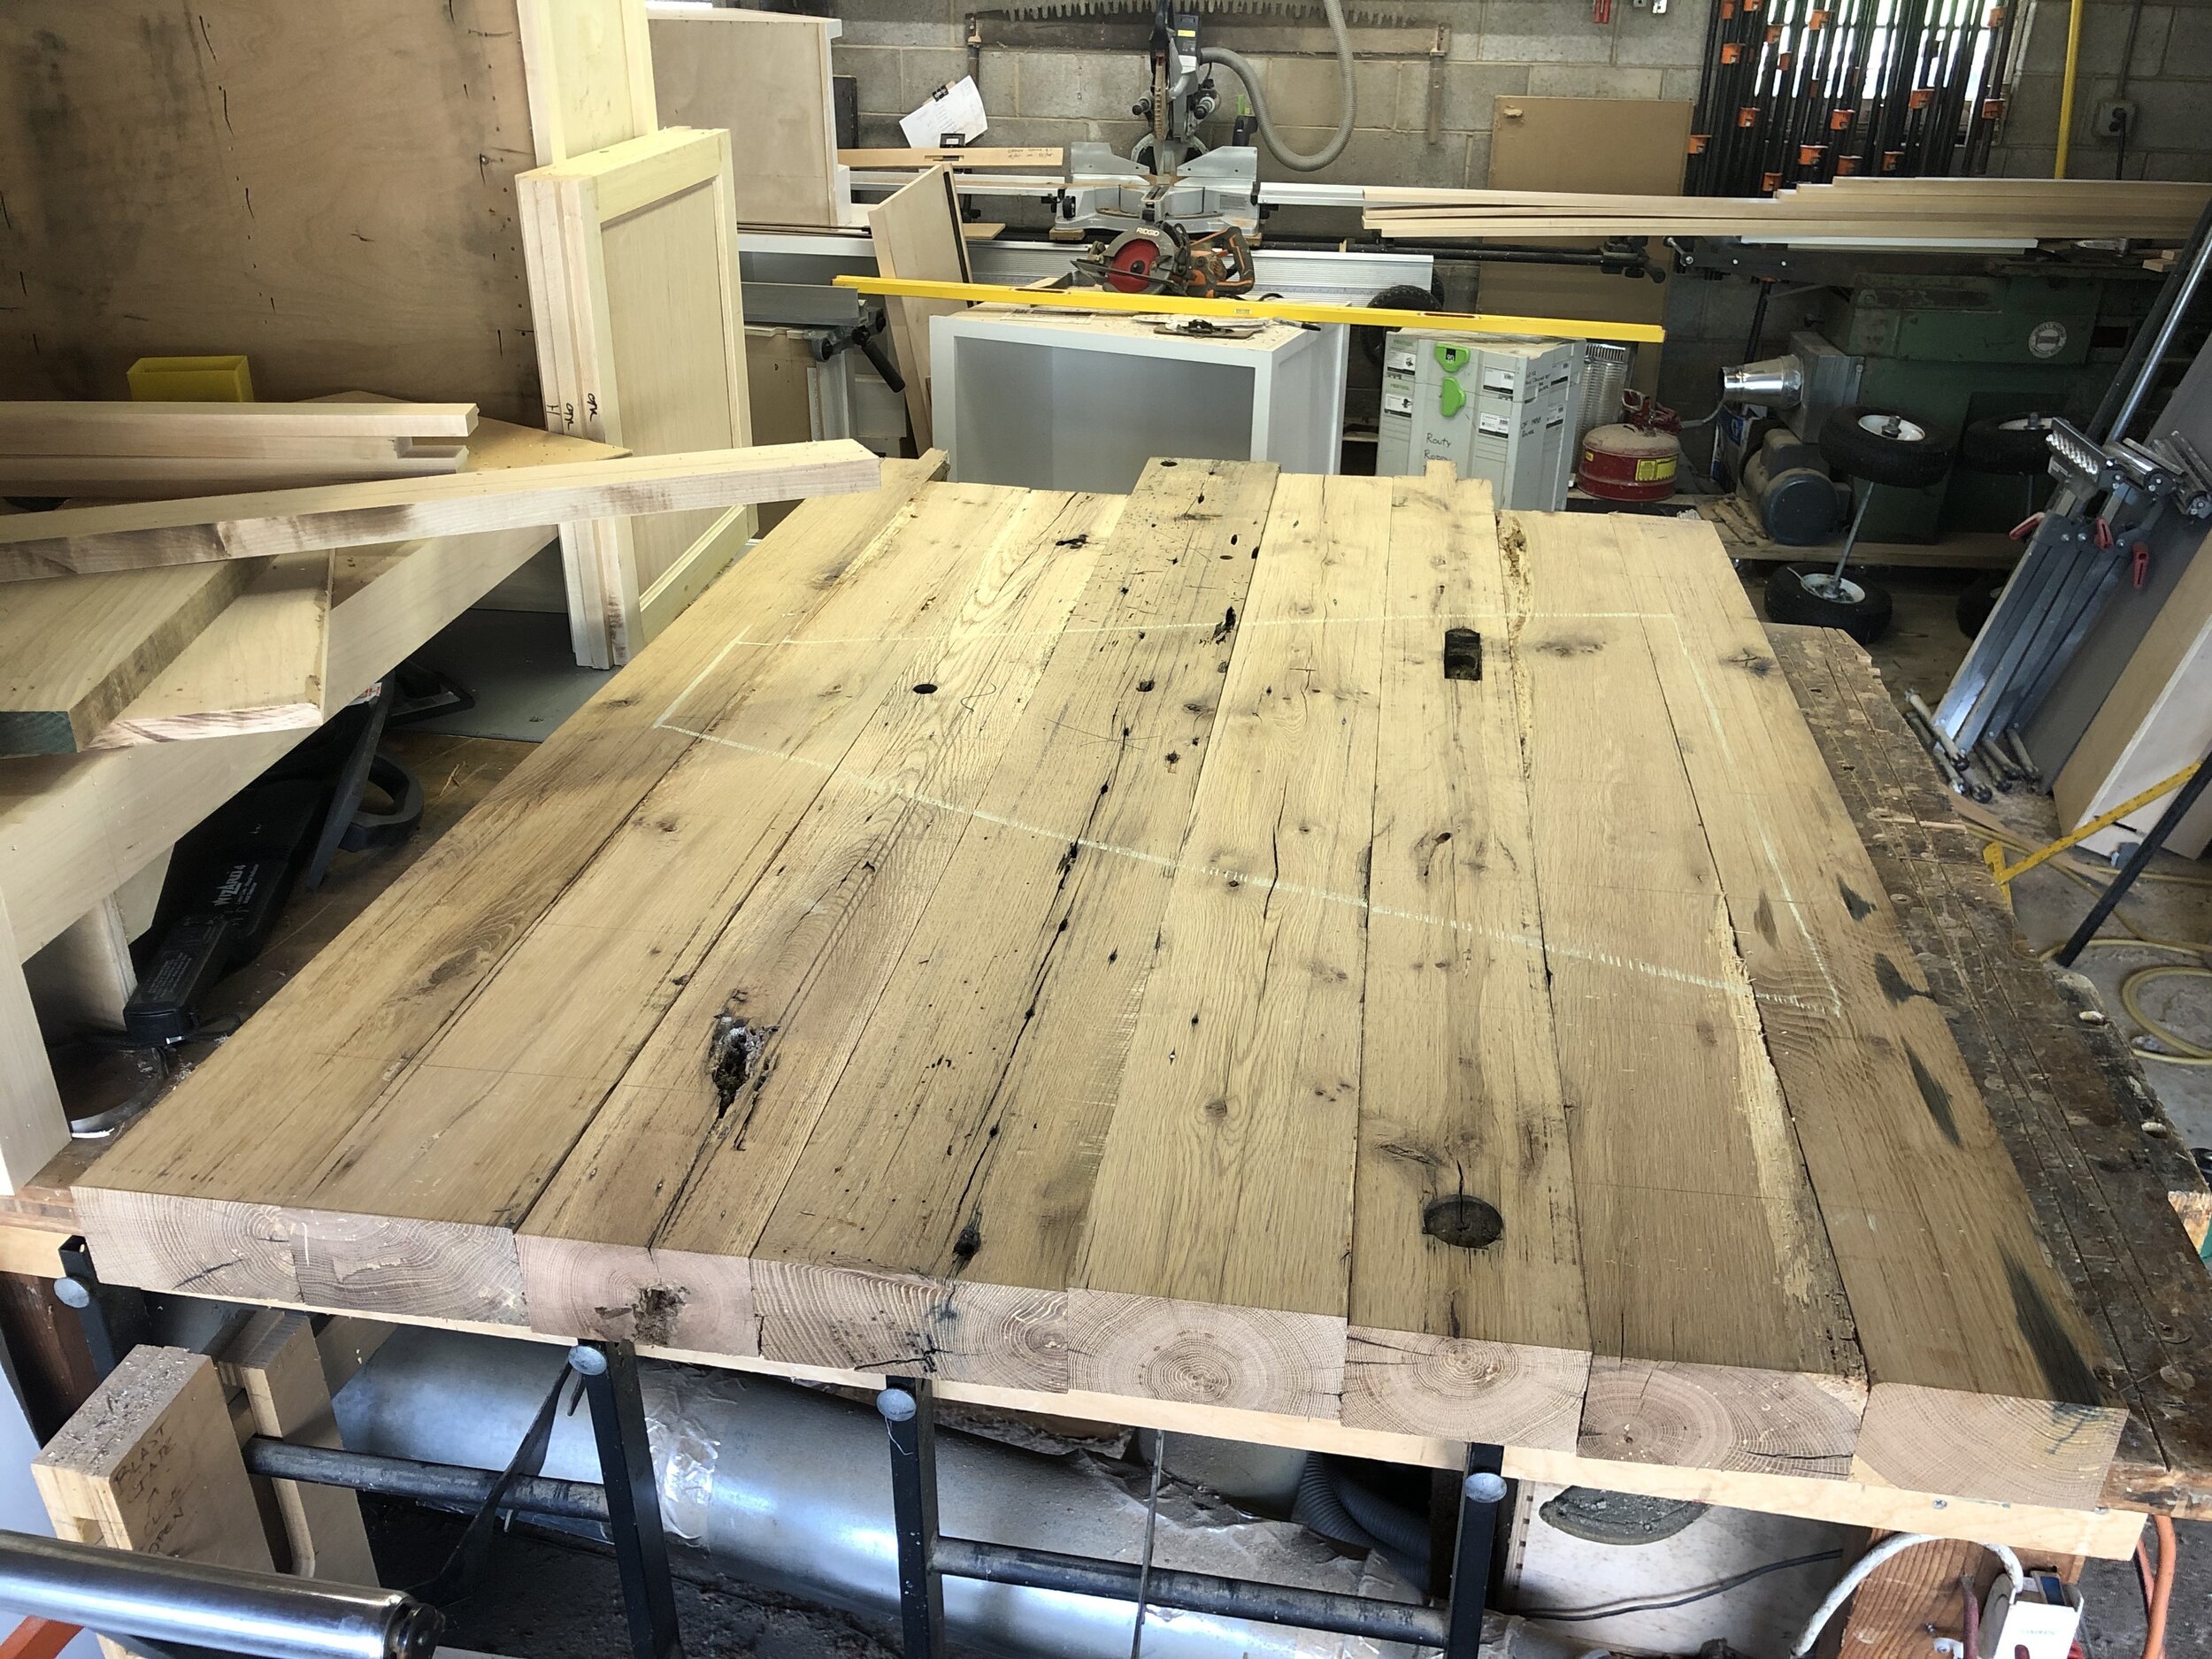  A client asked me to make them a peninsula for their kitchen, with a wooden top made from some of the reclaimed barn beams I had in stock at my shop. The countertop is 3” thick, and approximately 48” wide by 60” long. 